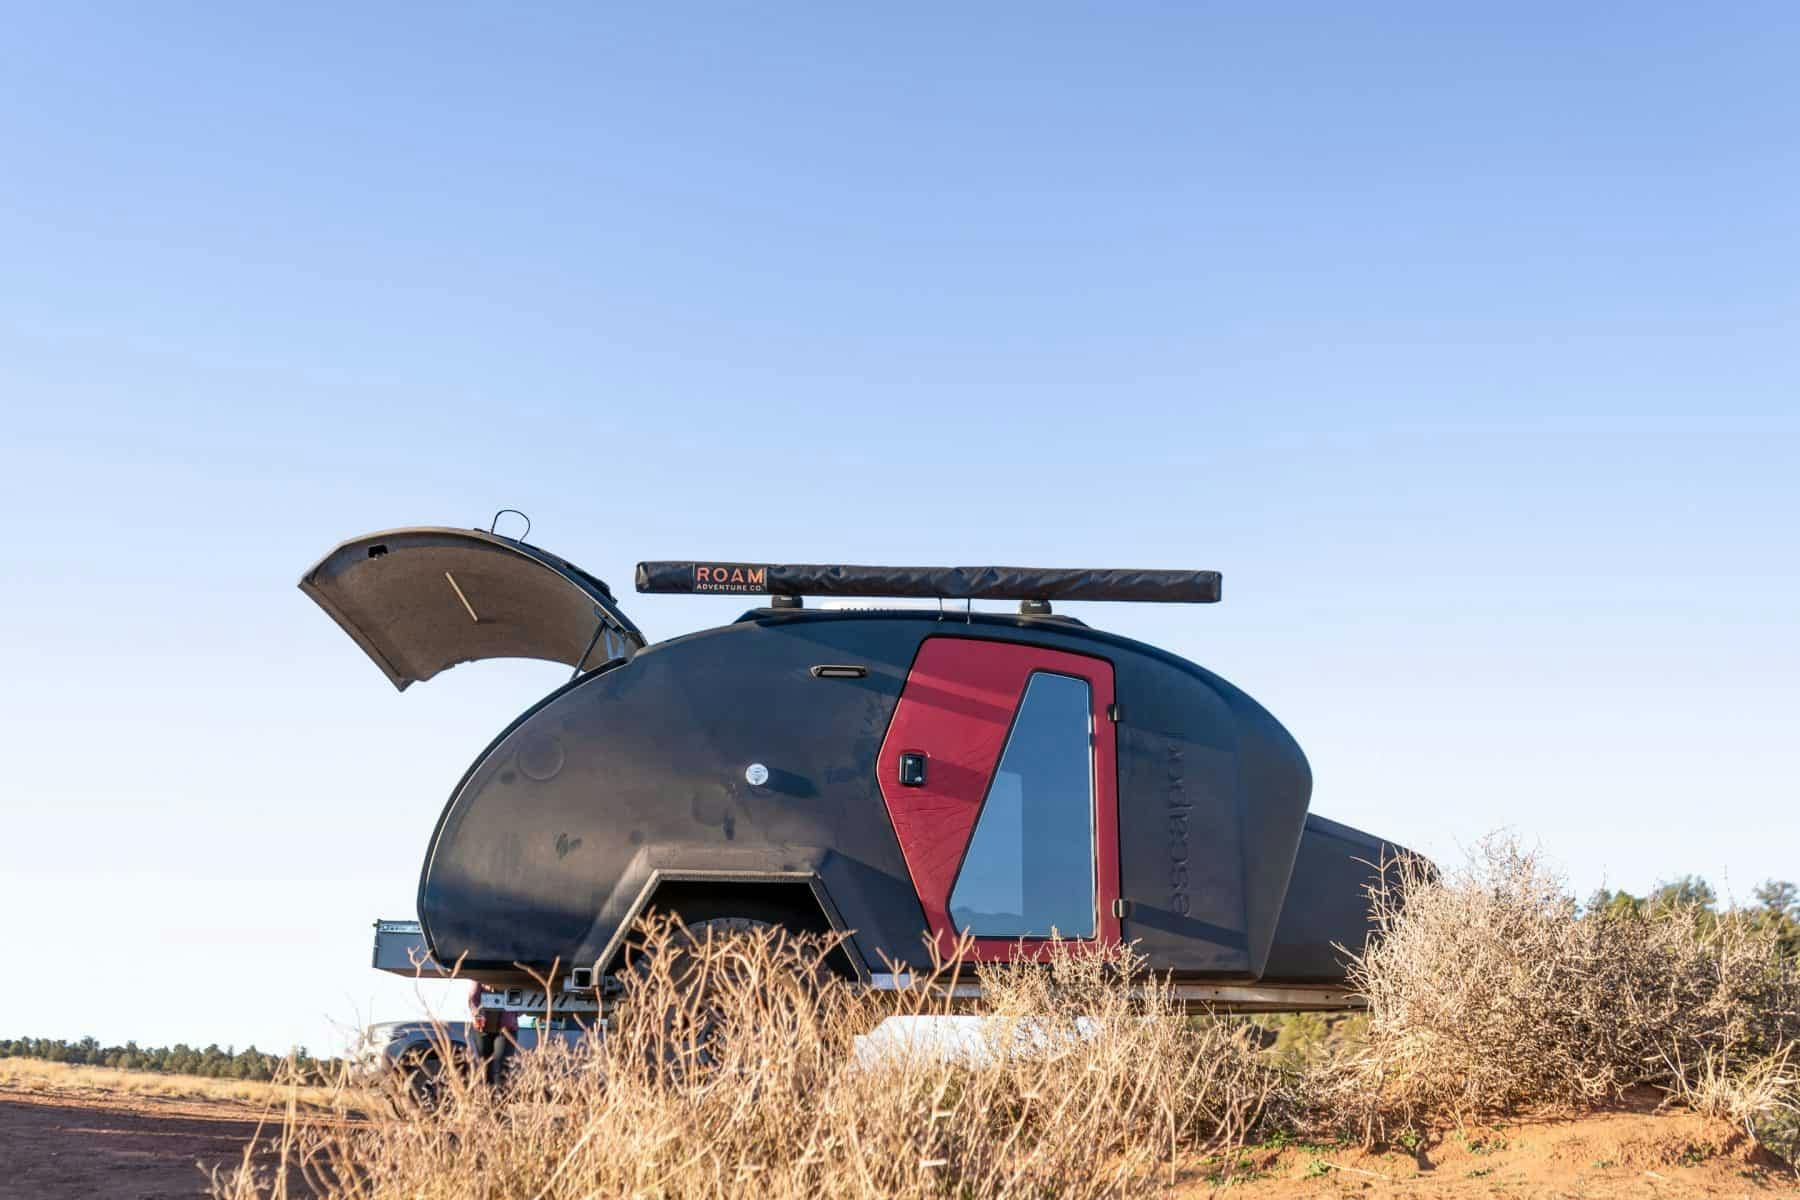 A navy blue teardrop camper with a red door, parked in a desert lanscape.